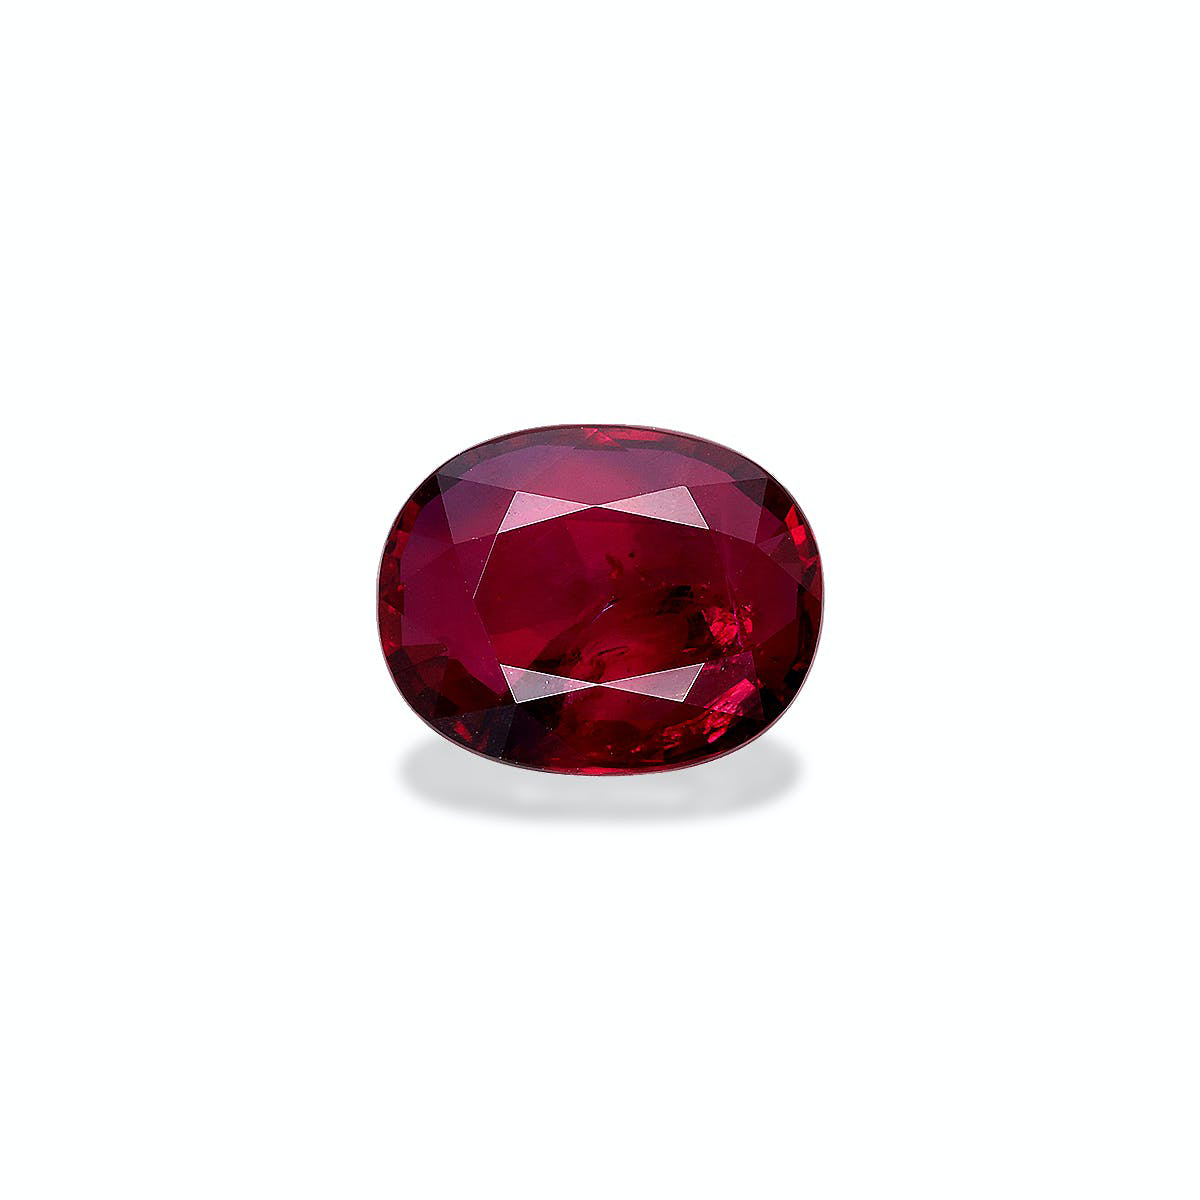 Picture of Unheated Mozambique Ruby 5.02ct - 11x9mm (J1-73)